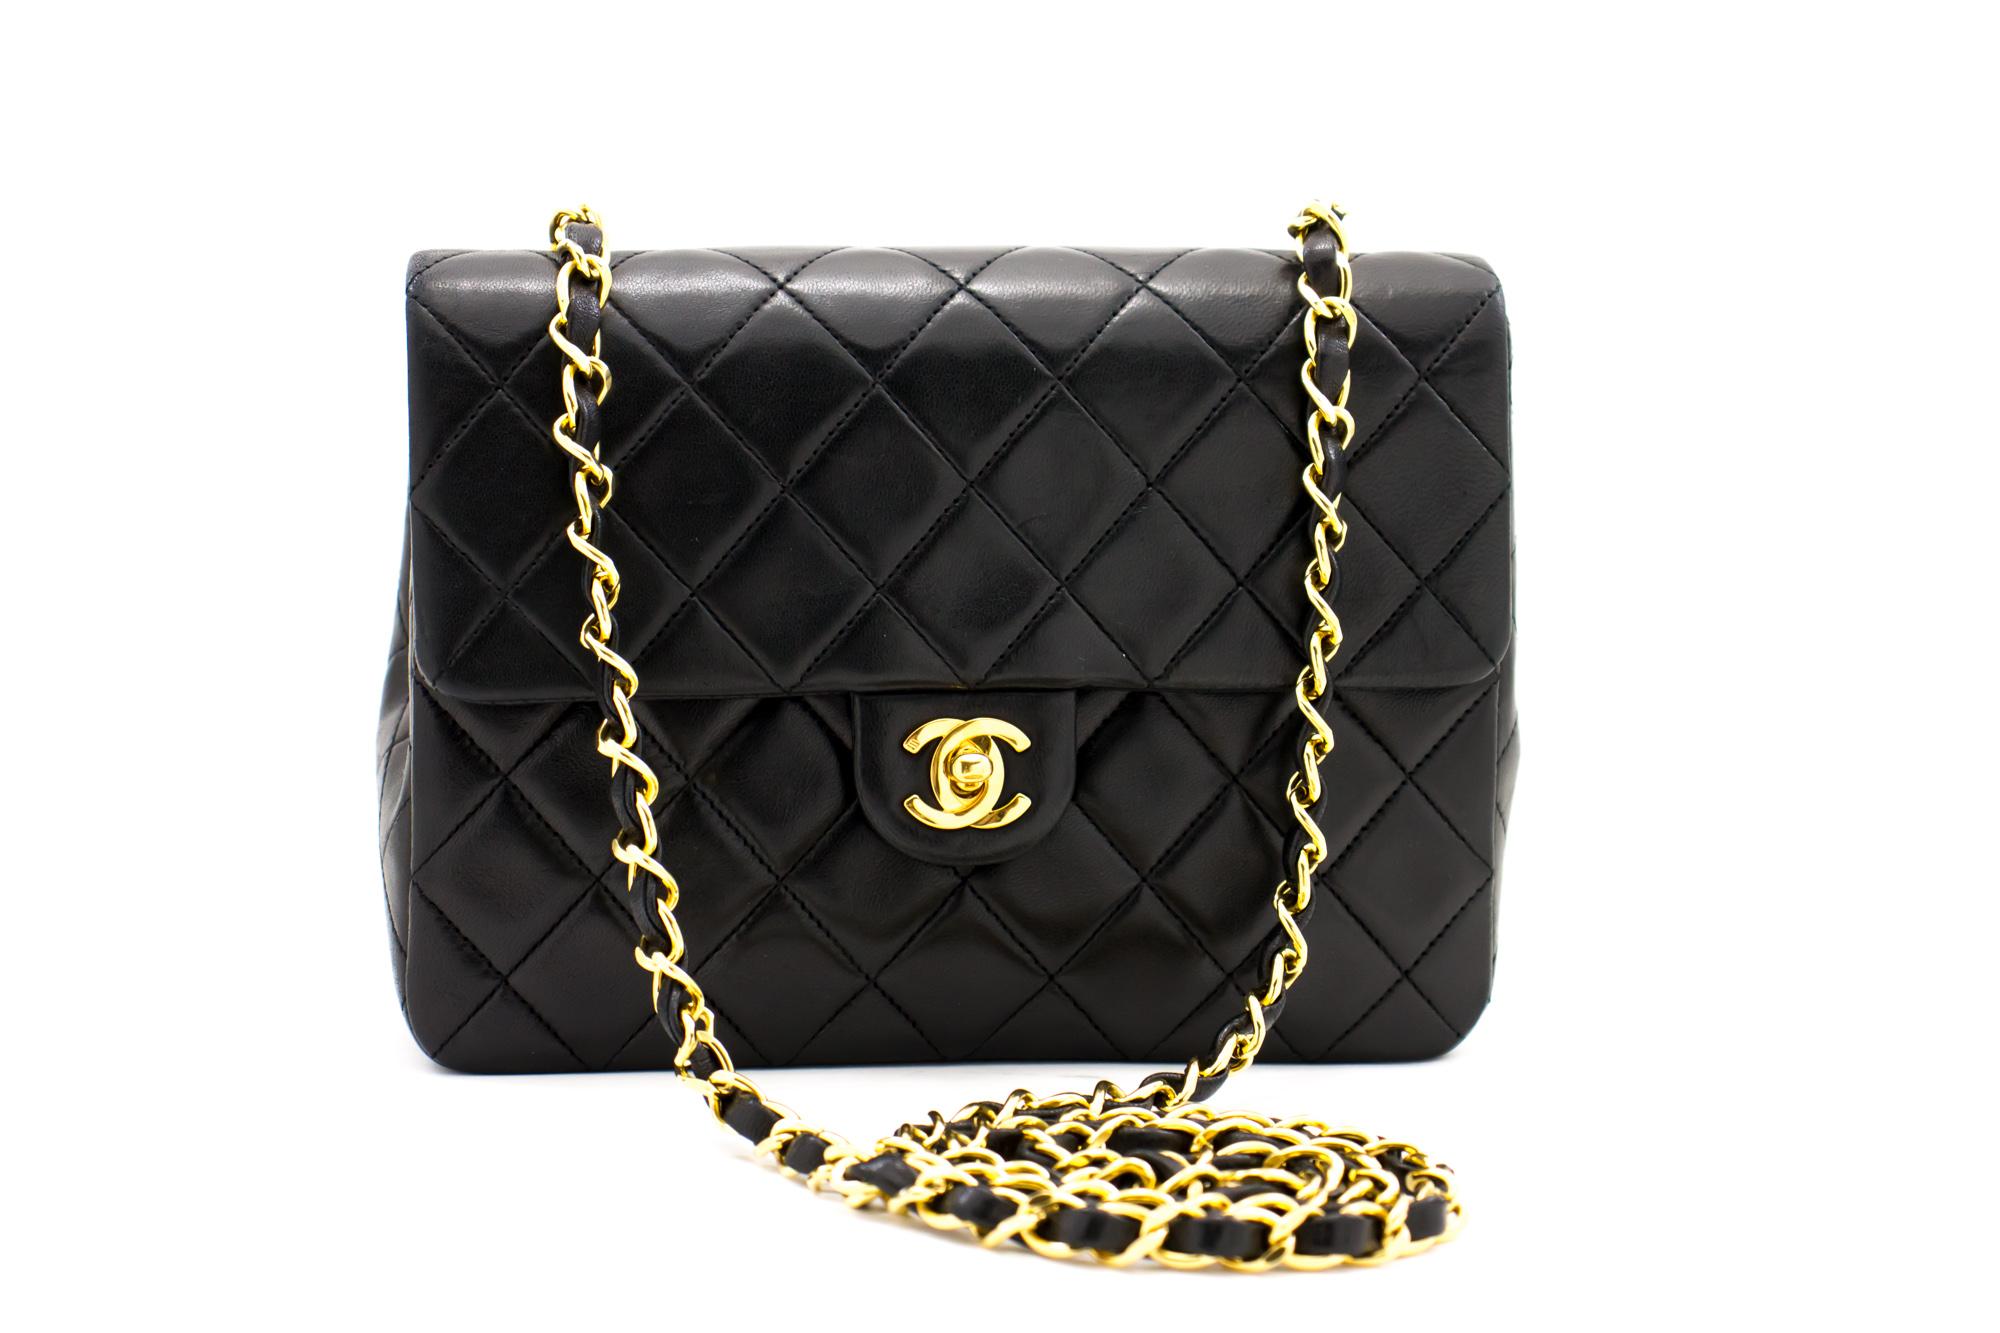 An authentic CHANEL Mini Square Small Chain Shoulder Bag Crossbody Black Purse. The color is Black. The outside material is Leather. The pattern is Solid. This item is Vintage / Classic. The year of manufacture would be 1989-1991.
Conditions &